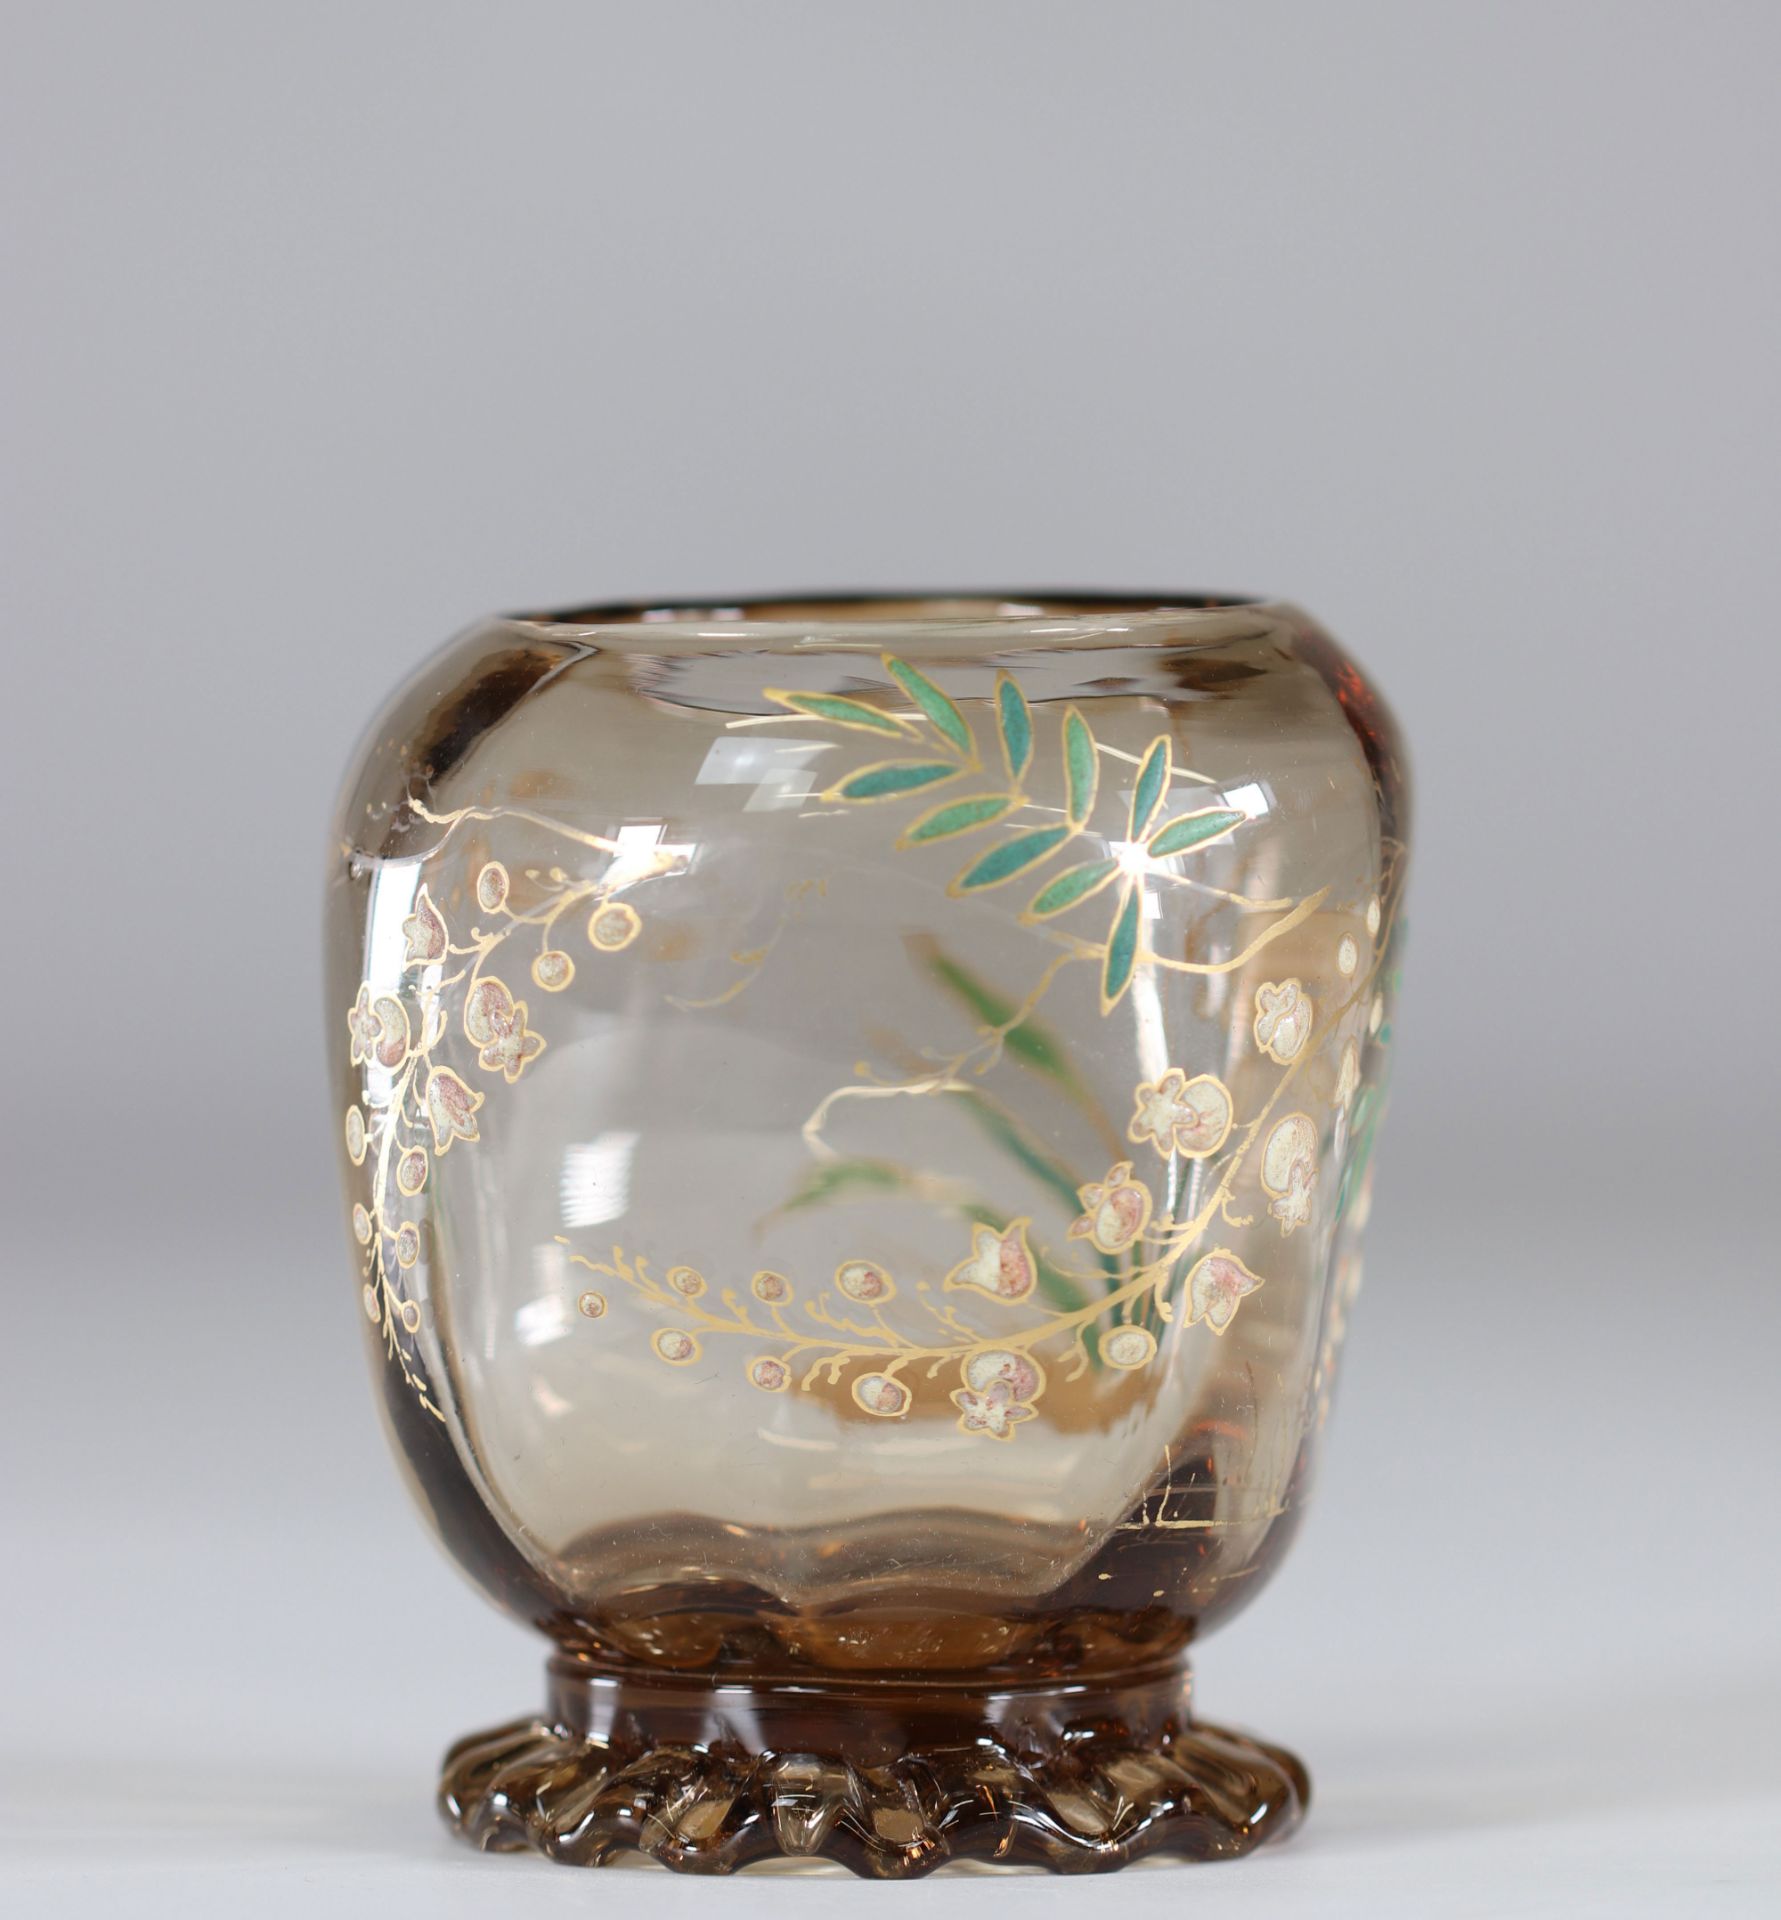 Emile Galle crystal vase "with lily of the valley" - Image 2 of 5